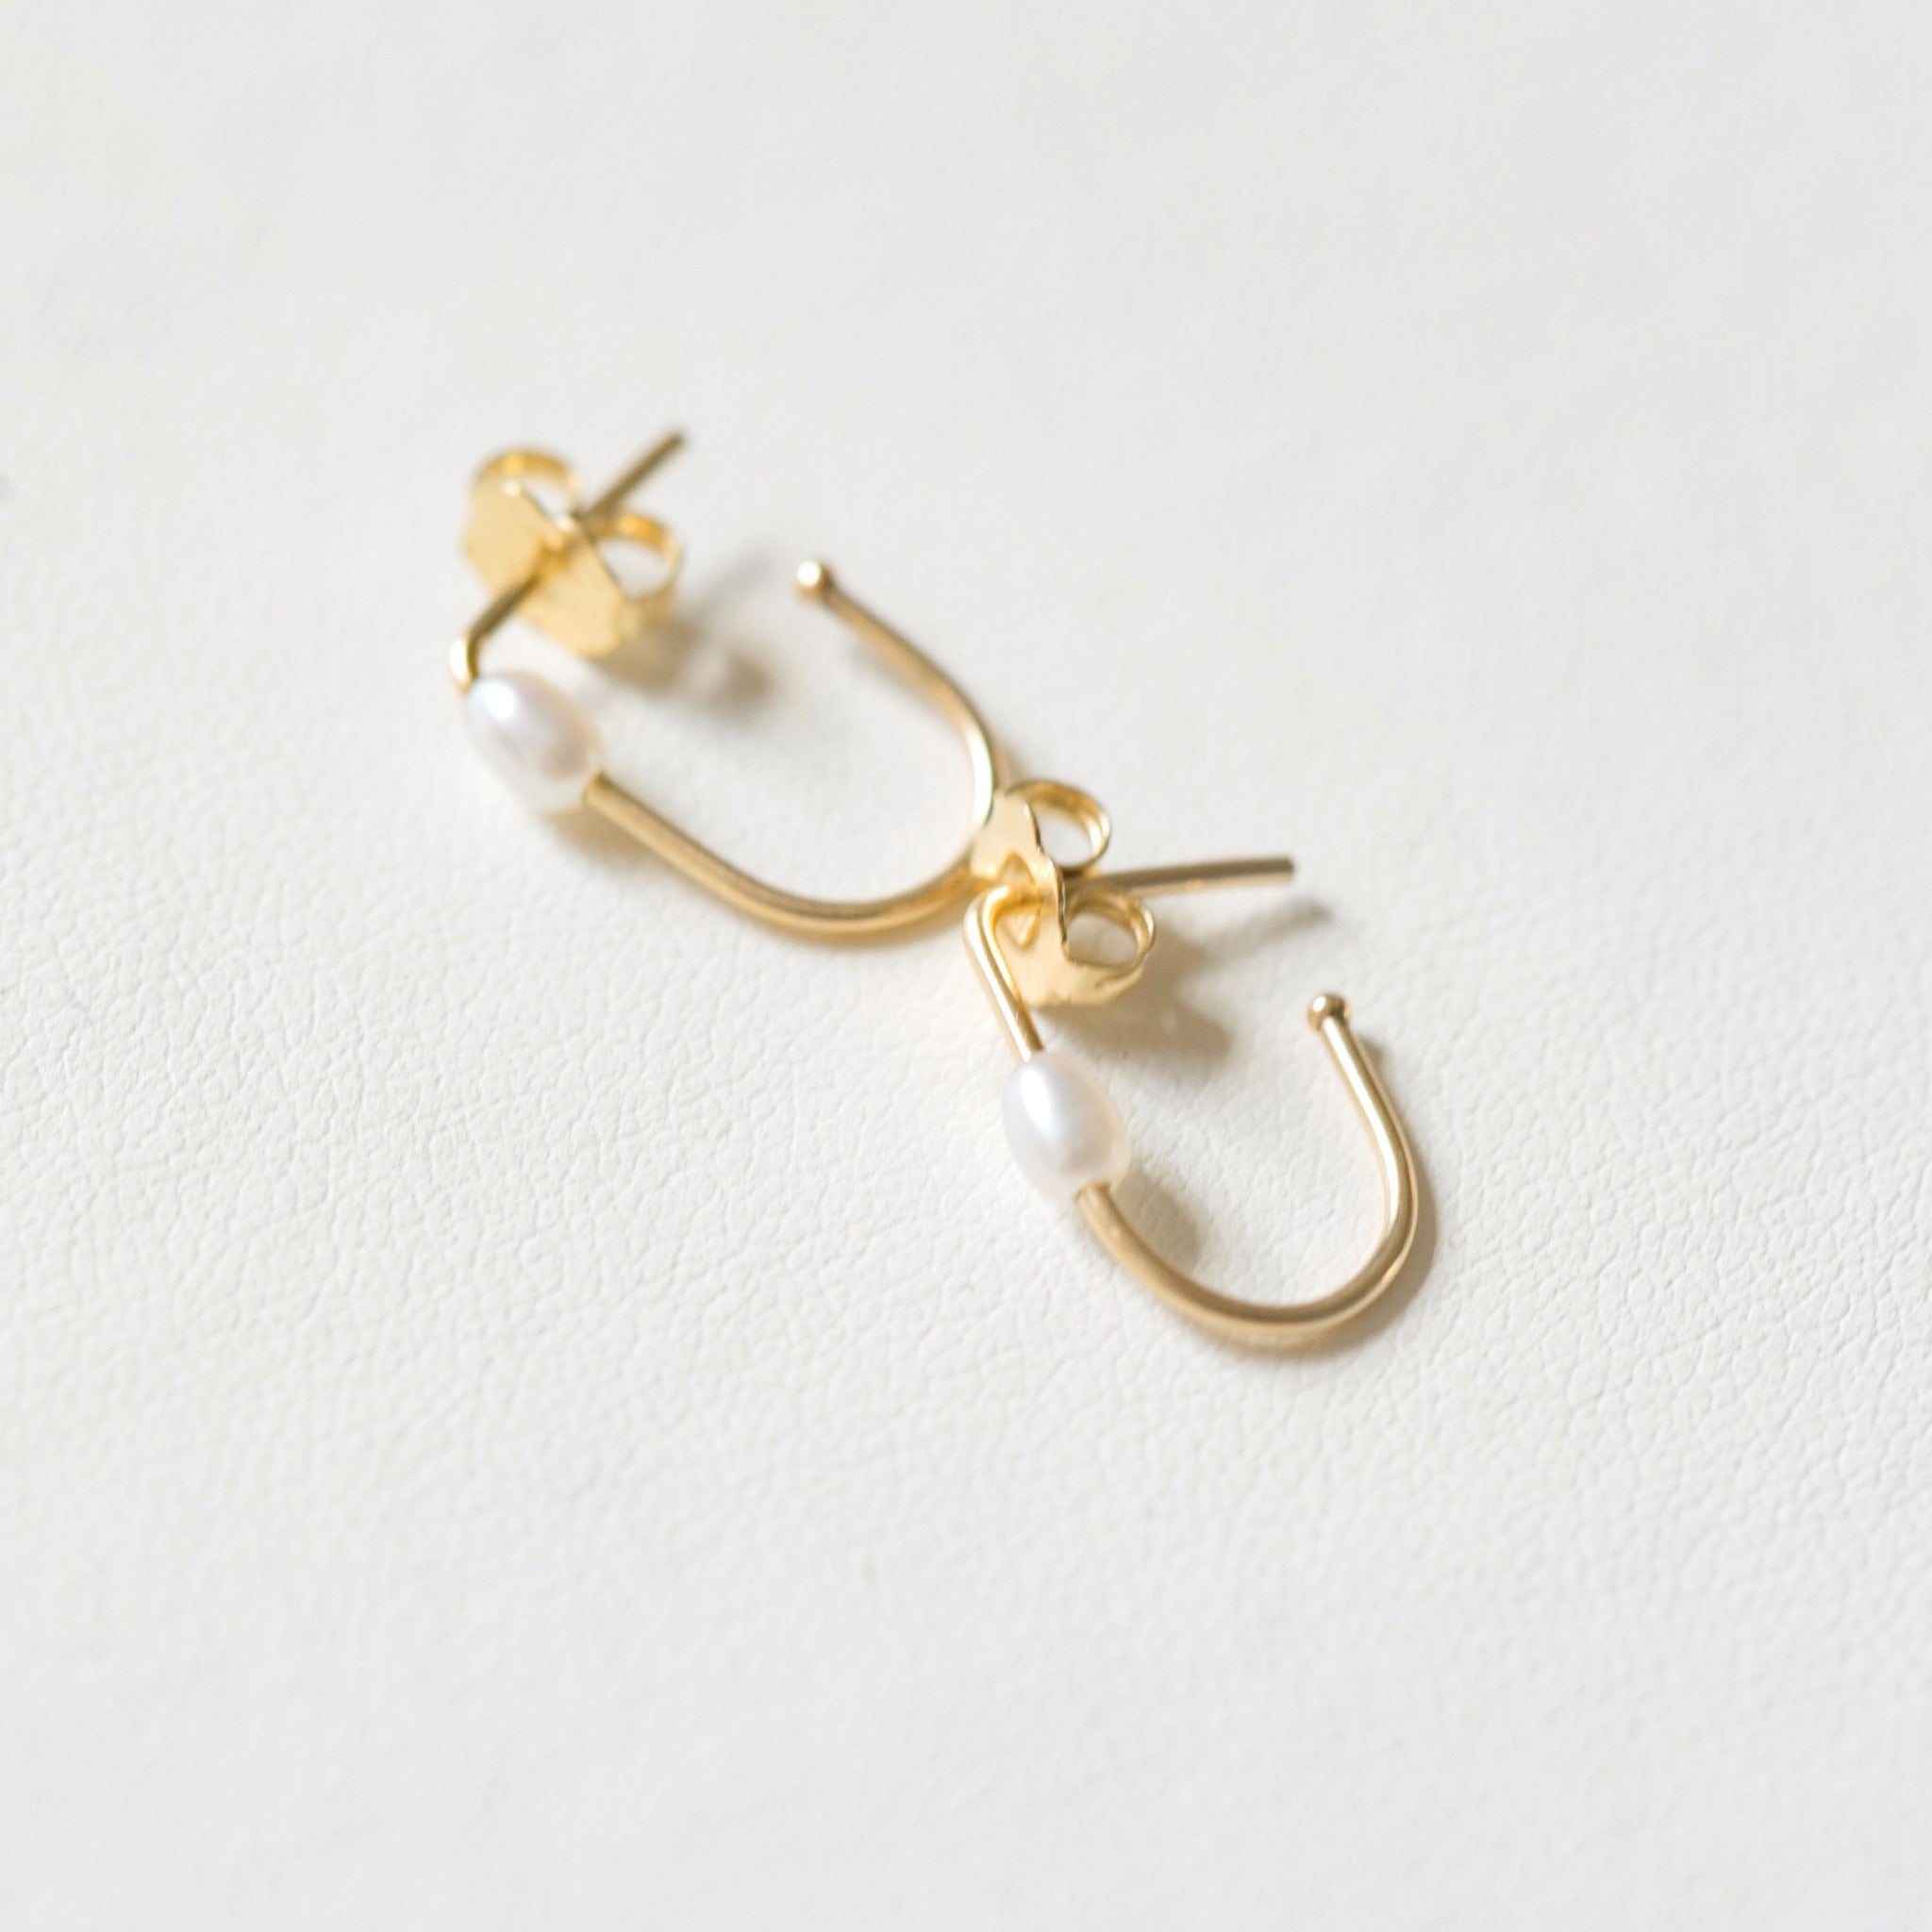 Oval pearls on an oval shaped hoop earring. The earring is made with recycled gold and sustainably sourced pearls.